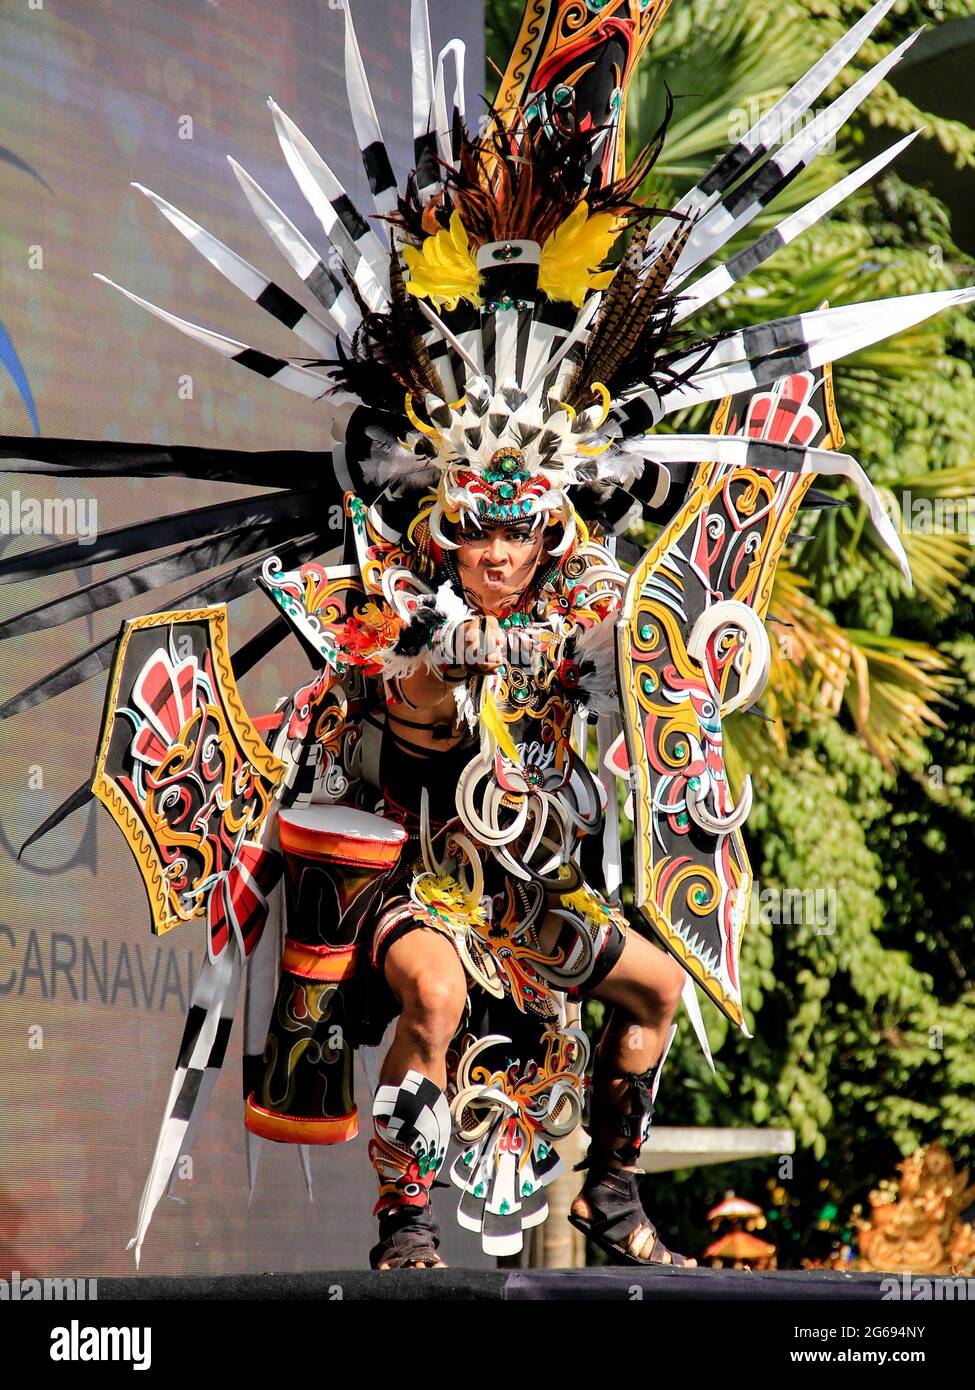 One of the Jember Fashion Carnaval (JFC) participants in action on